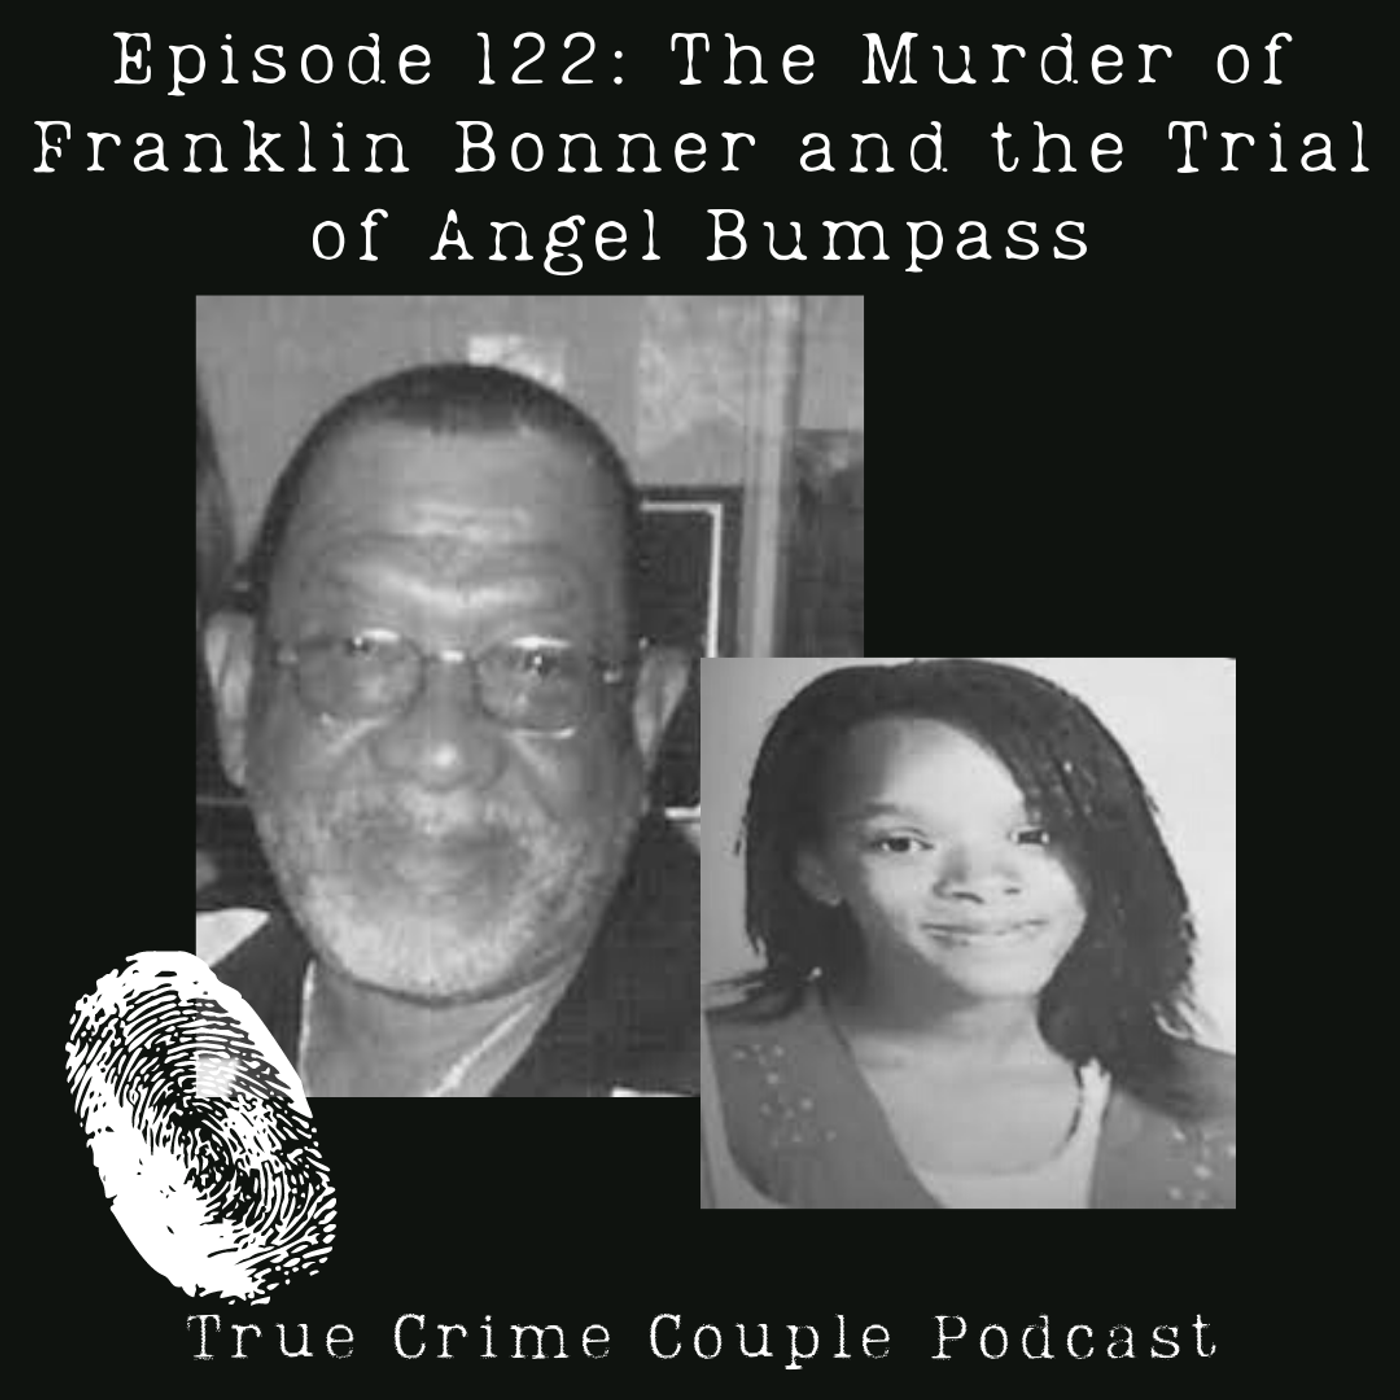 Episode 122: The Murder of Franklin Bonner and the Trial of Angel Bumpass